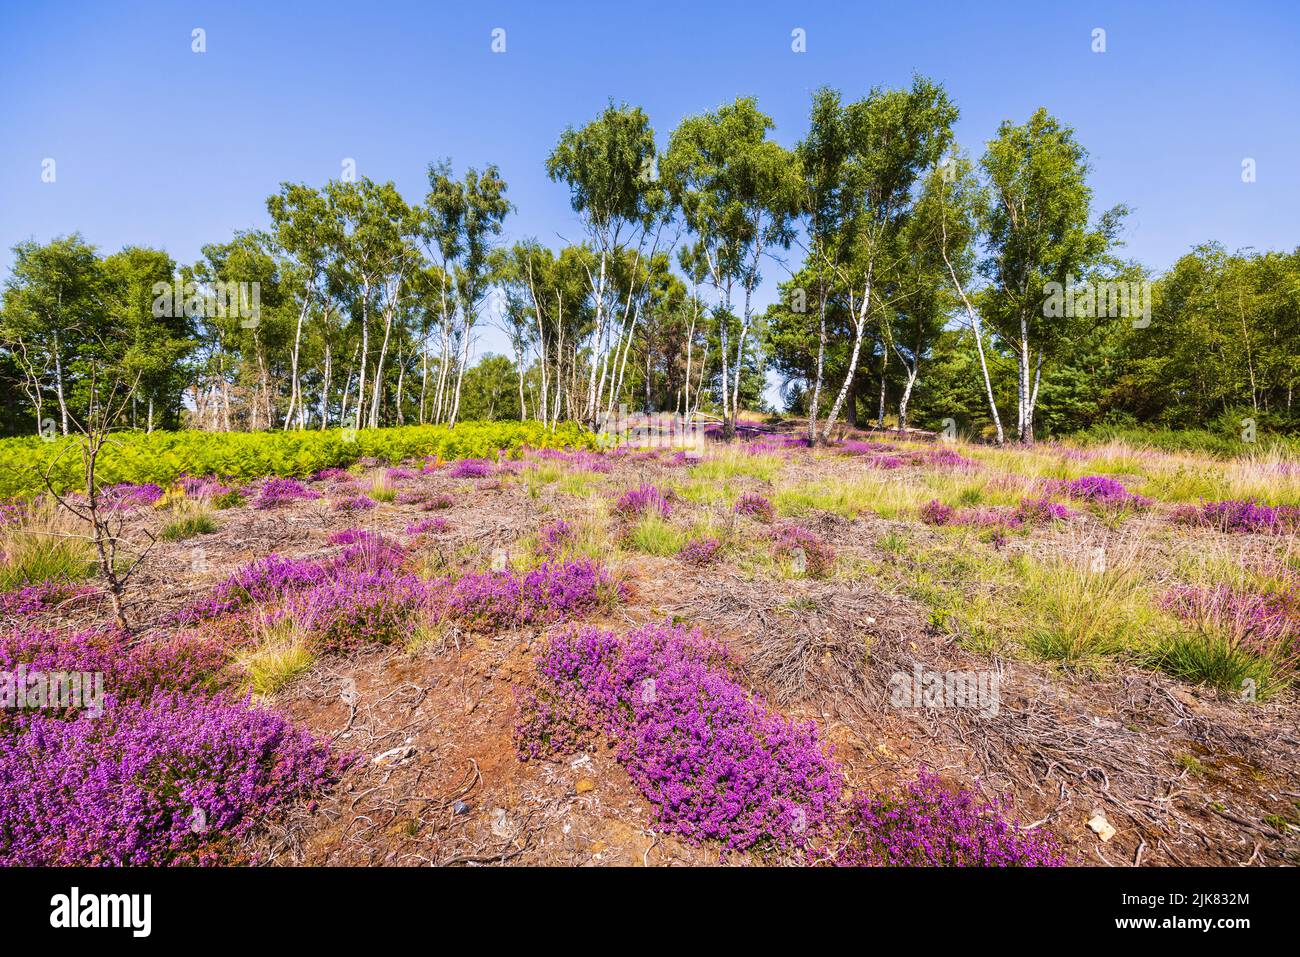 Heathland on Chobham Common, Surrey, south-east England with purple heather and a row of silver birch (Betula pendula) trees, blue sky on a sunny day Stock Photo